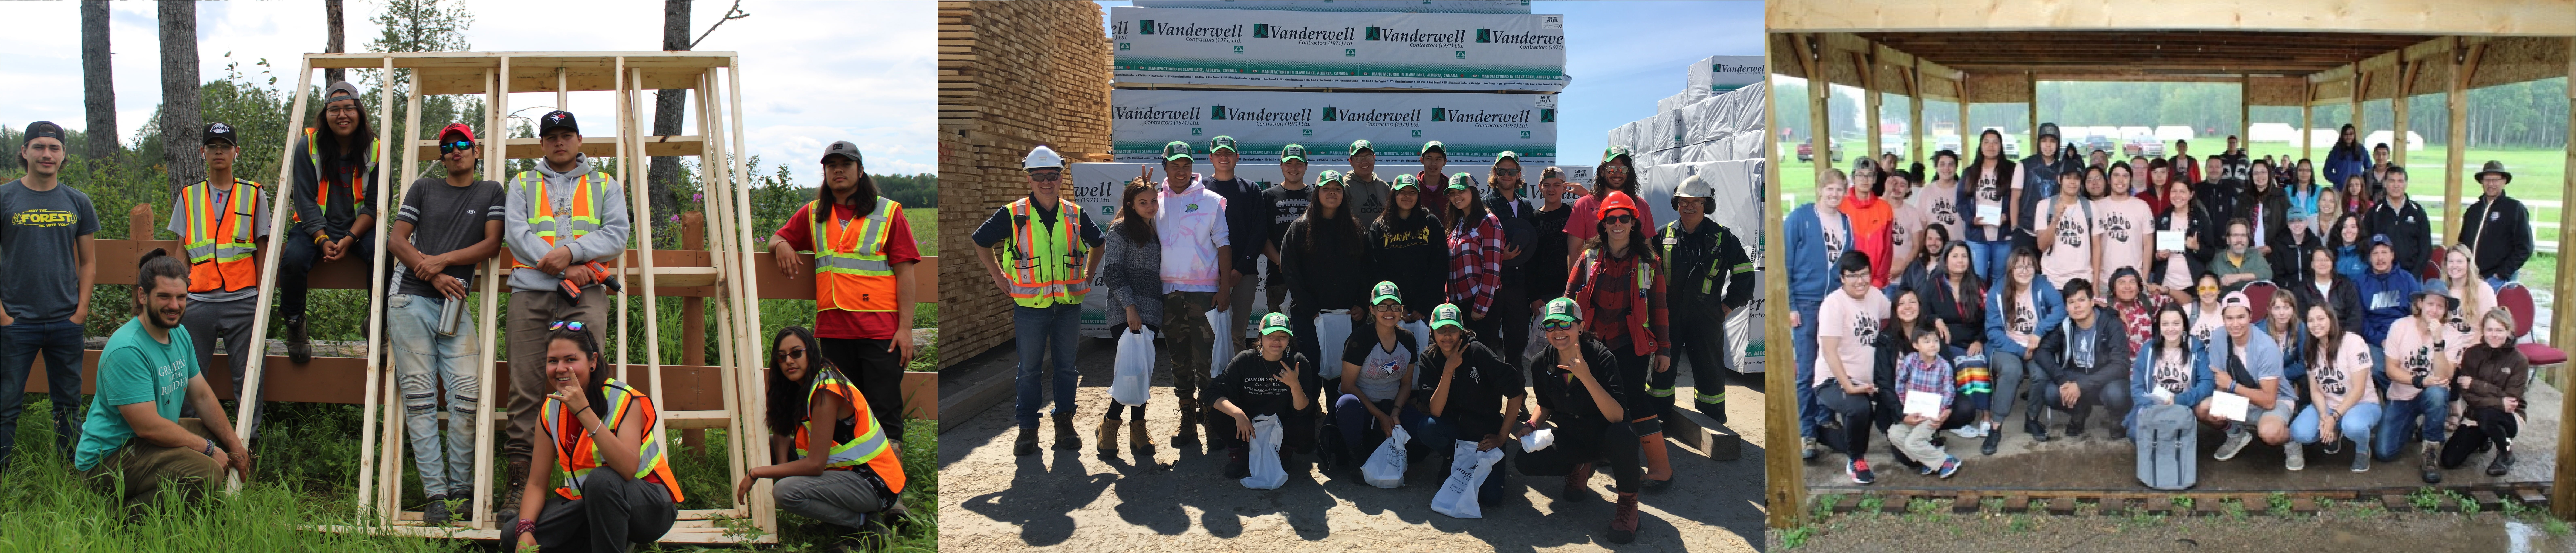 (Left) Youths' building a woodshed with Vanderwell lumber, (Middle) Vanderwell mill tour, (Right) Closing Ceremony with the OYEP youth graduates